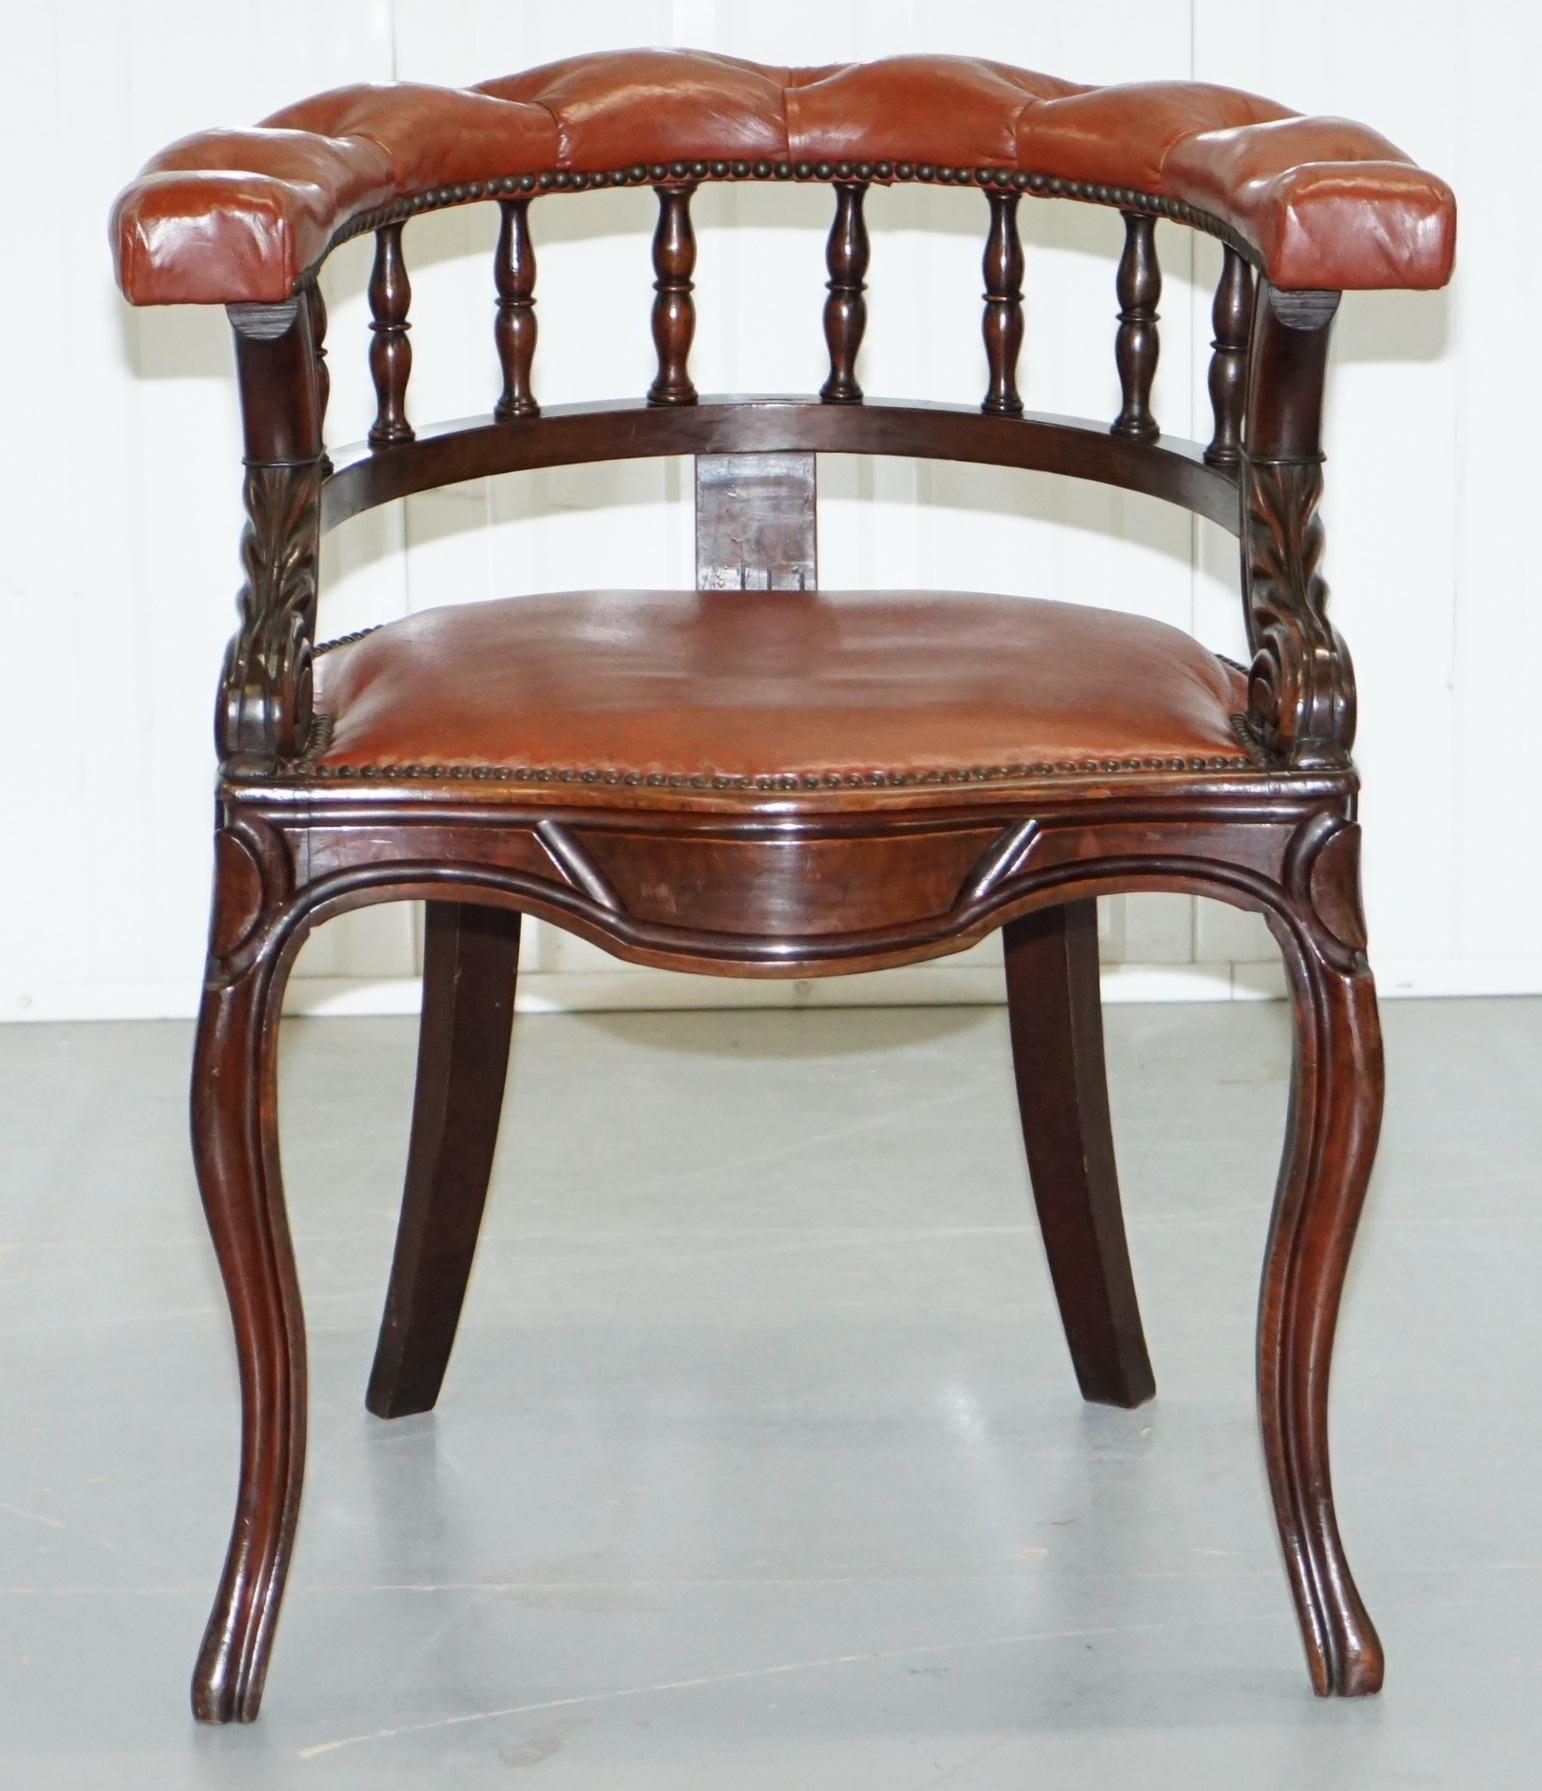 Lovely Pair of Victorian Horse Shoe Back Chesterfield Buttoned Captians Chairs (Viktorianisch)